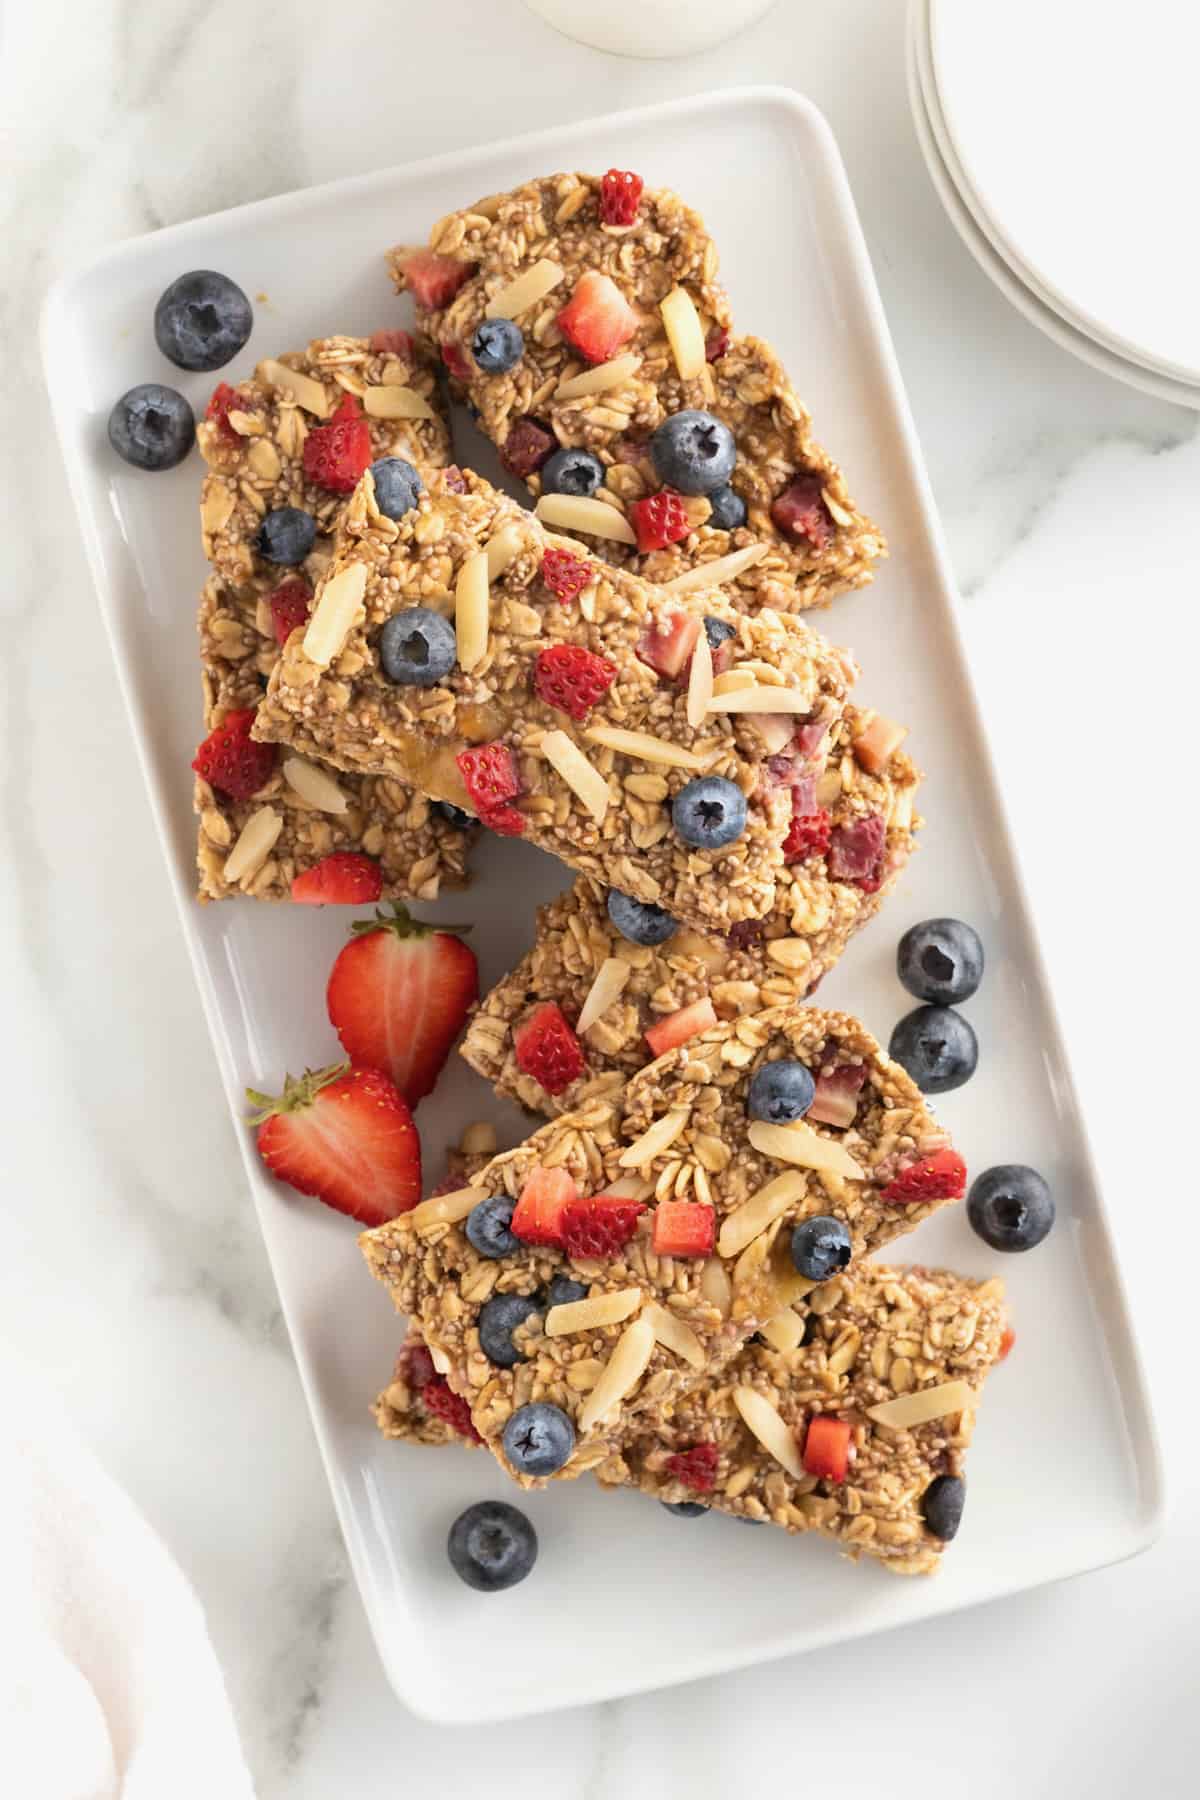 A white rectangular serving platter stacked with overnight oats bars and blueberries and strawberry slices scattered around.